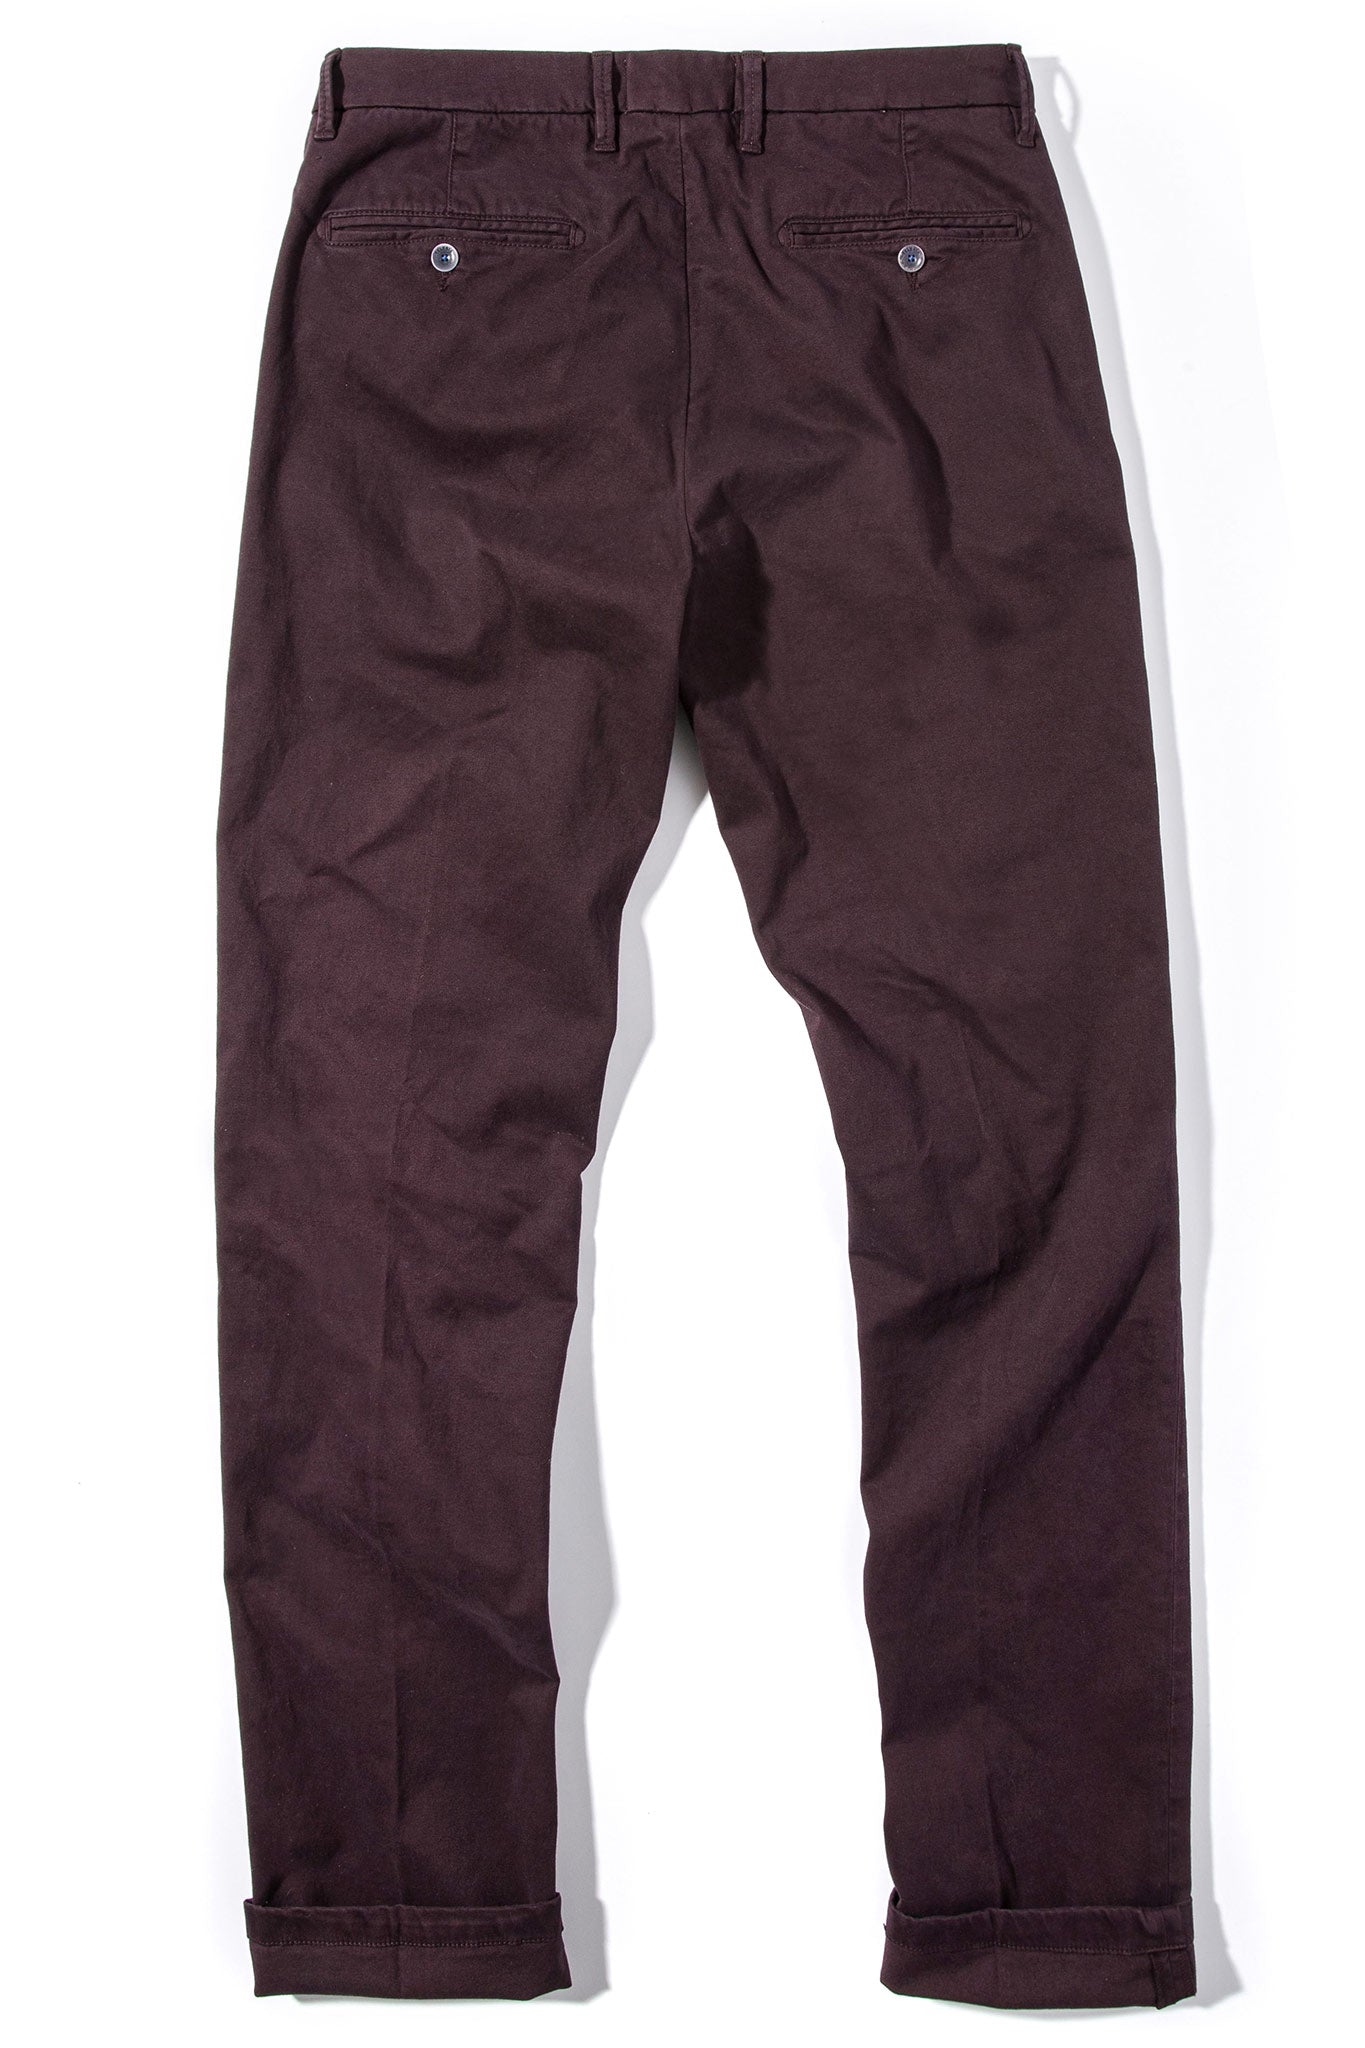 Routt Soft Touch Chino In Mosto | Mens - Pants - 4 Pocket | Teleria Zed